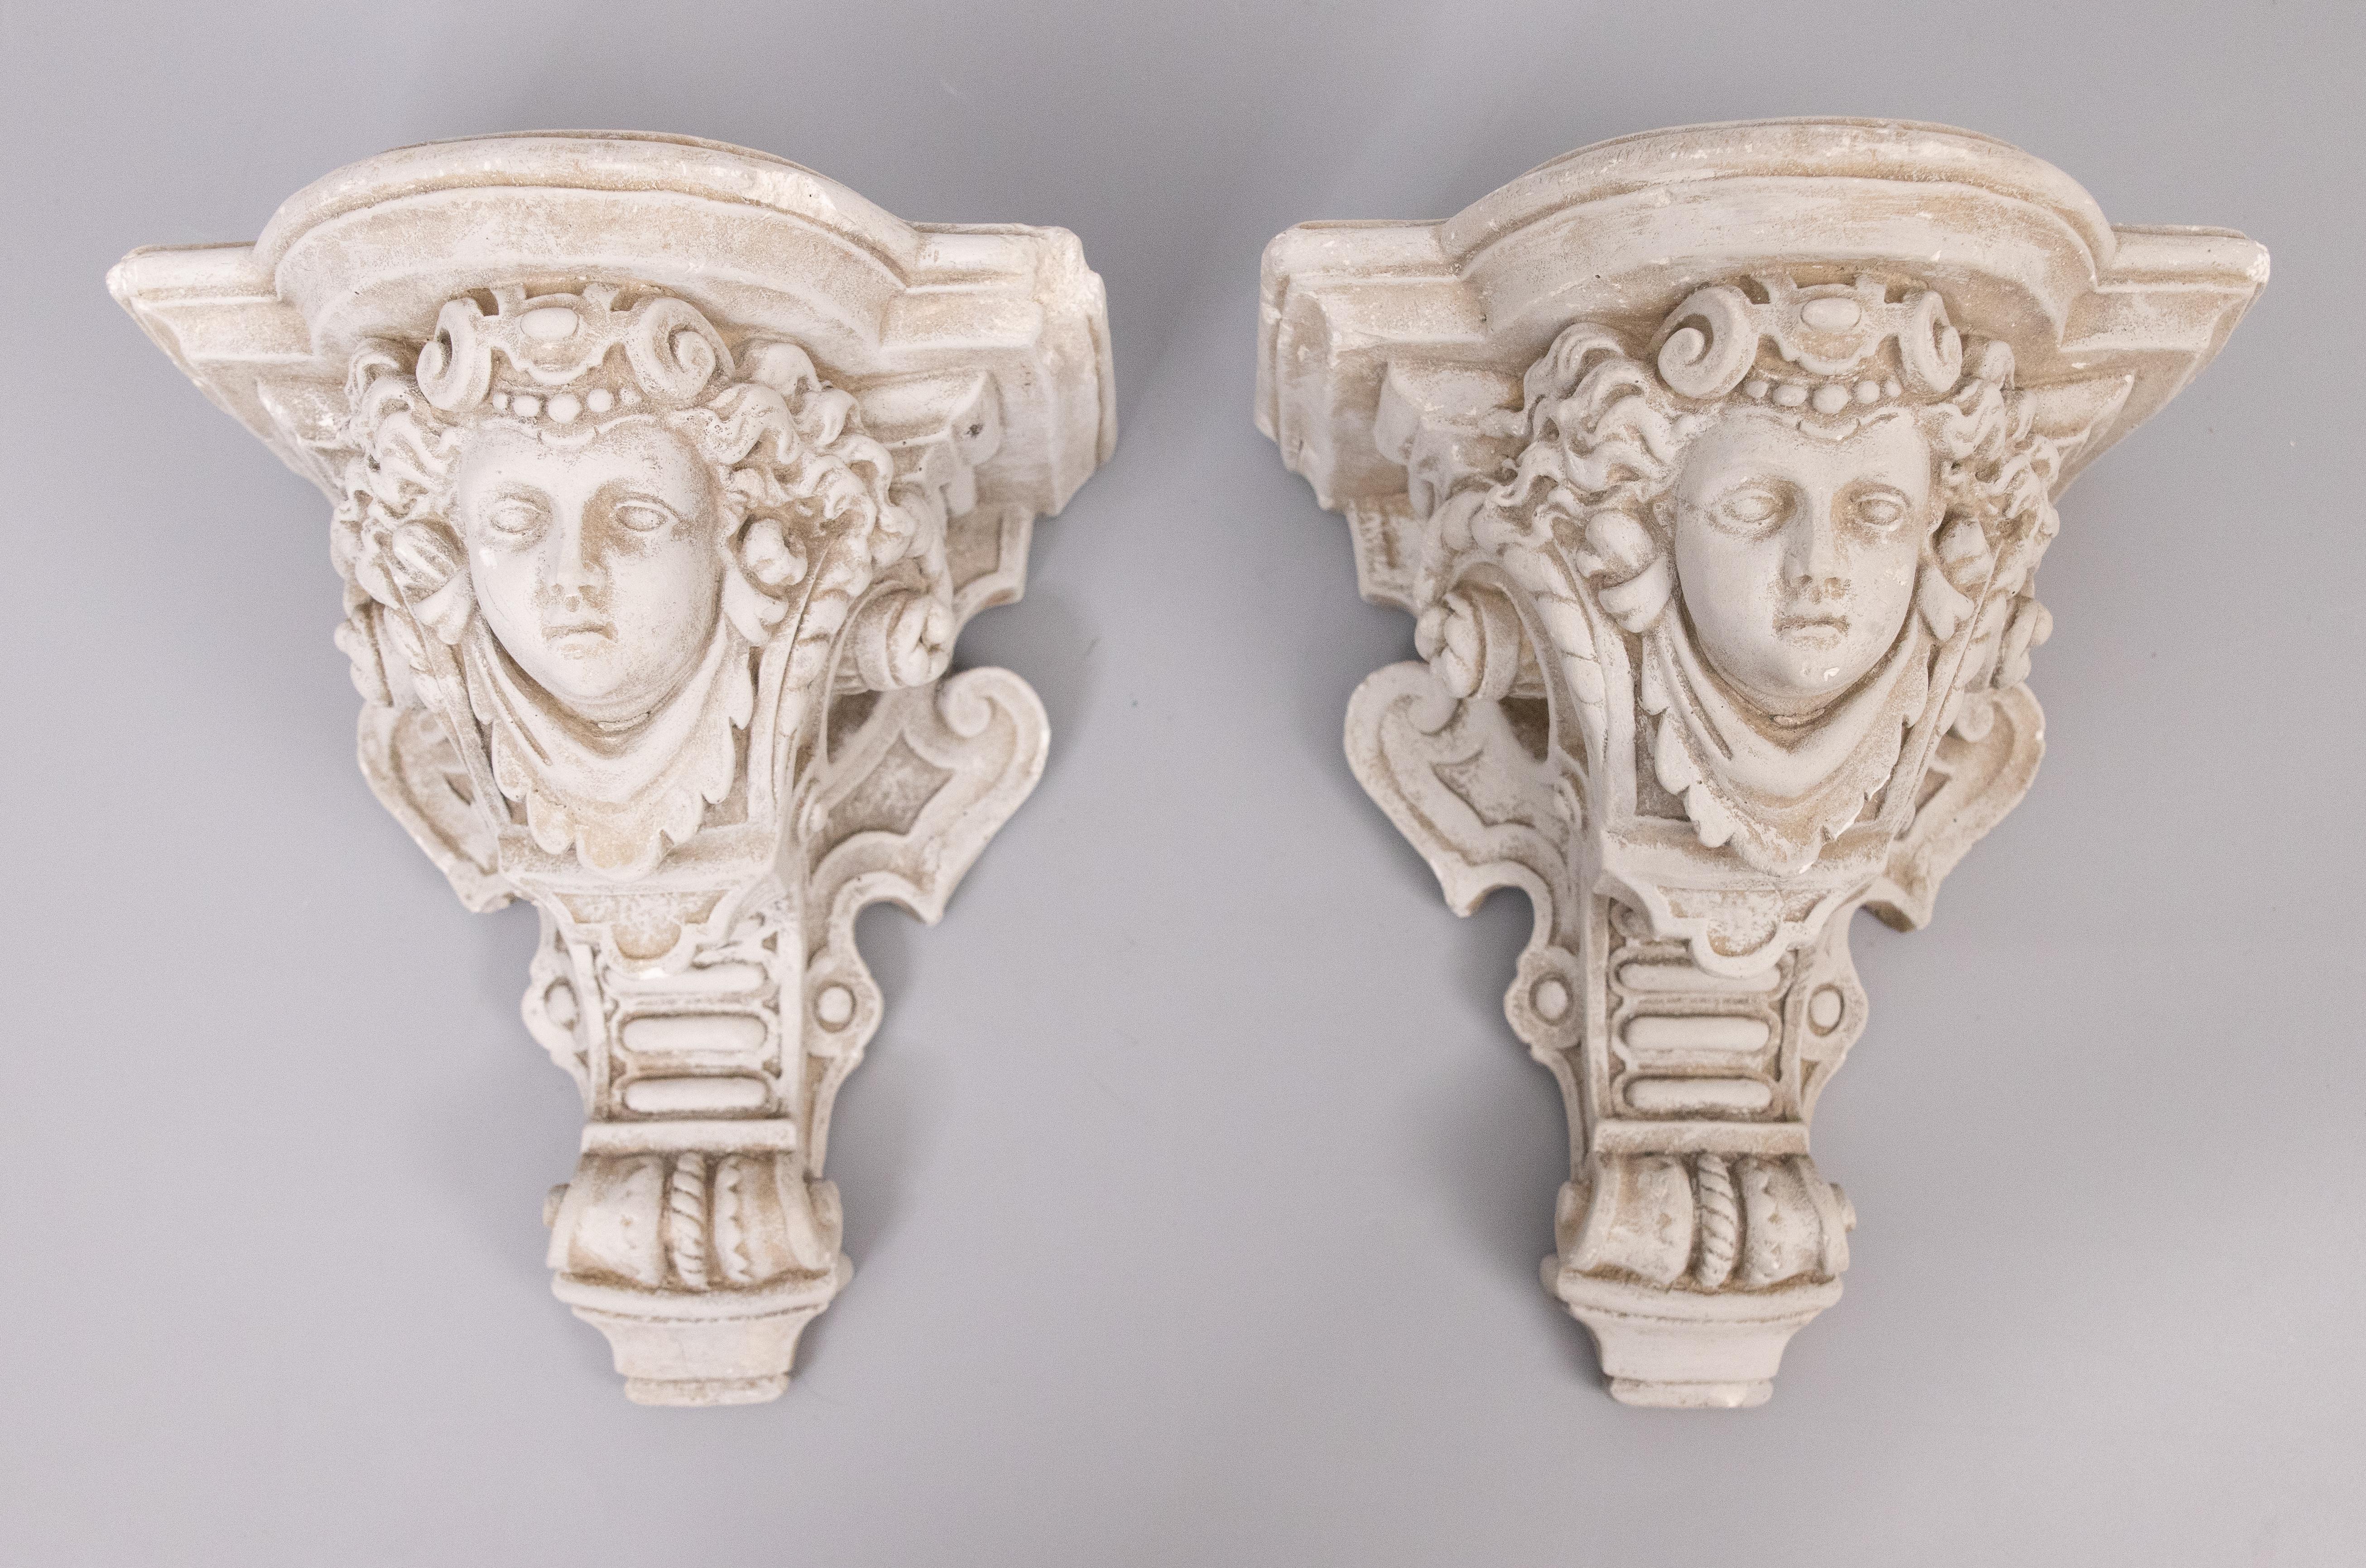 A fine pair of French architectural plaster cherub or putti brackets with a Neoclassical design, circa 1950. These gorgeous corbels have a lovely gray patina and are a nice large size and heavy, together weighing over 11 lbs. They would be perfect